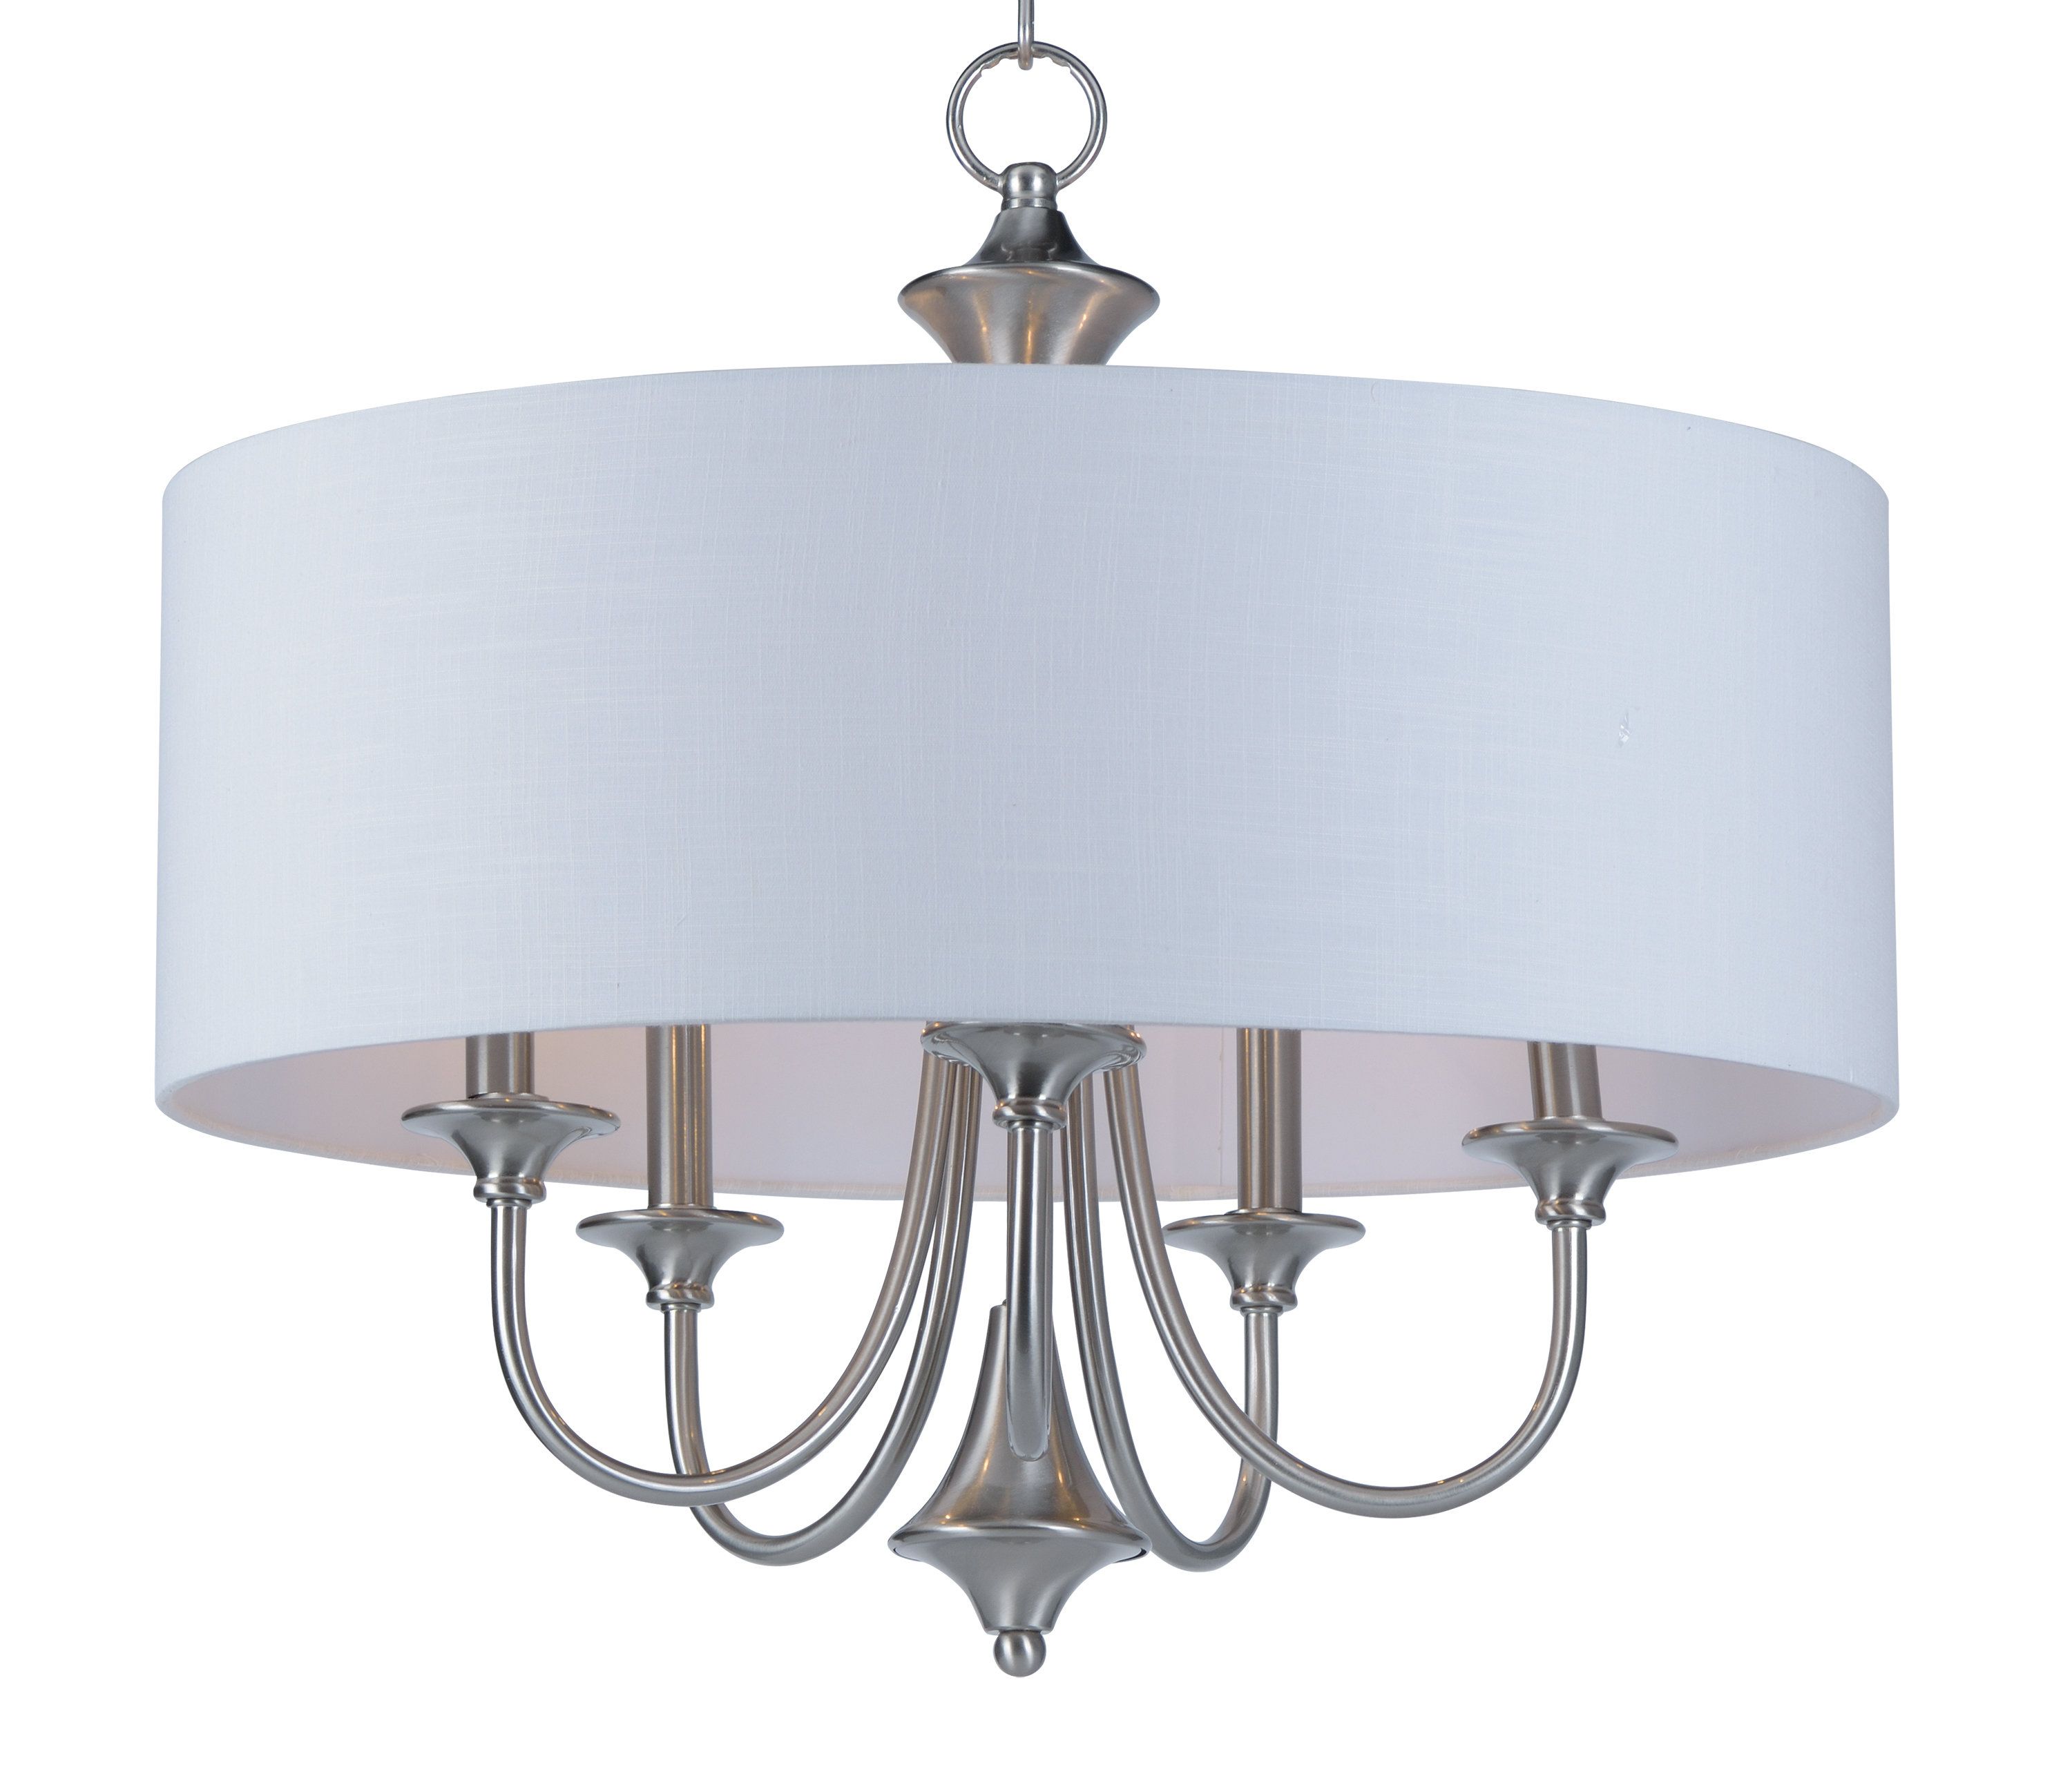 Buster 5 Light Drum Chandeliers In Best And Newest Wadlington 5 Light Drum Chandelier (View 5 of 20)